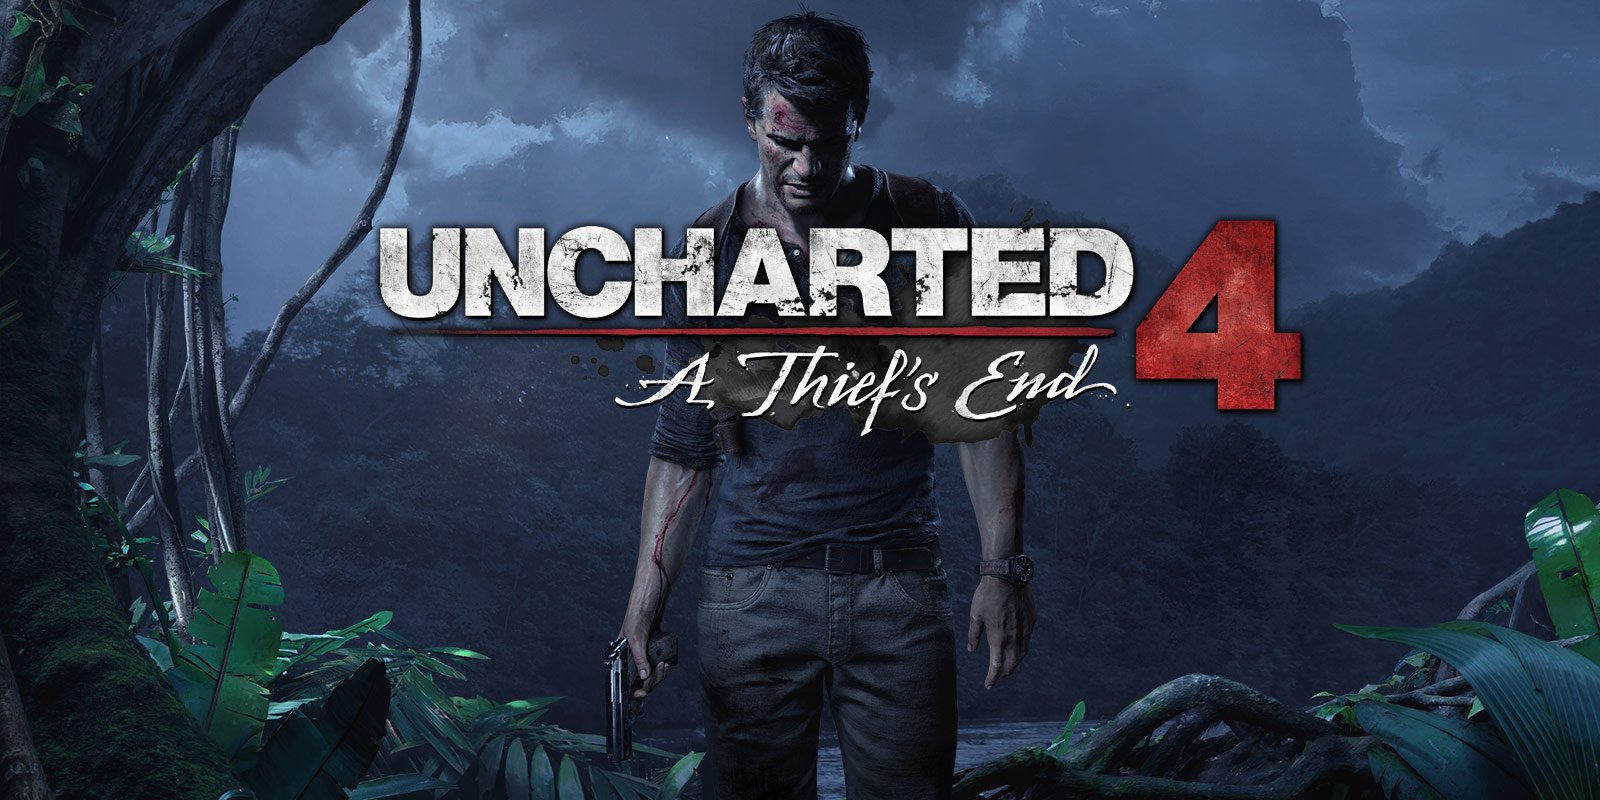 UNCHARTED REVIEW: THE STARTING POINT OF A THIEF